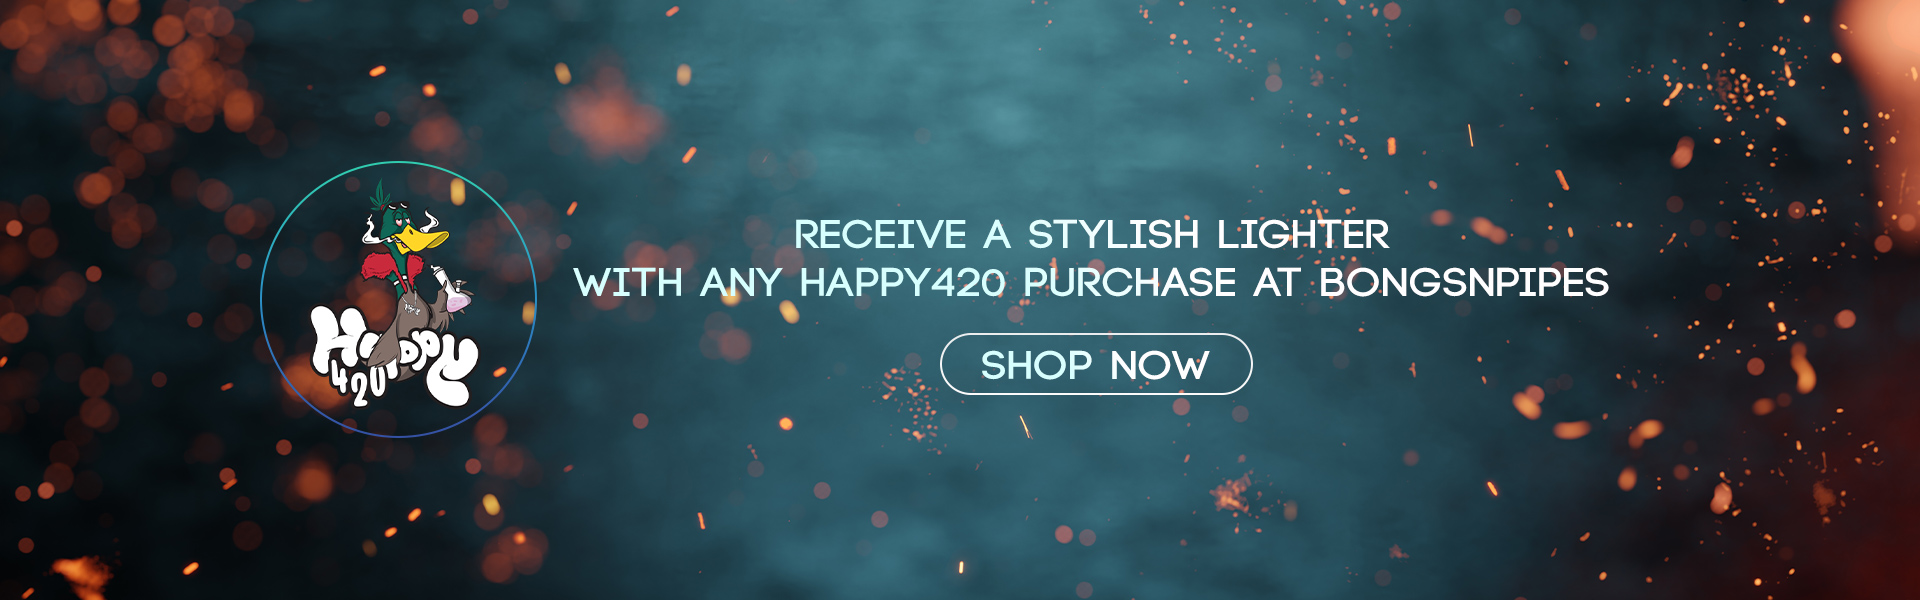 Free lighter with Happy420